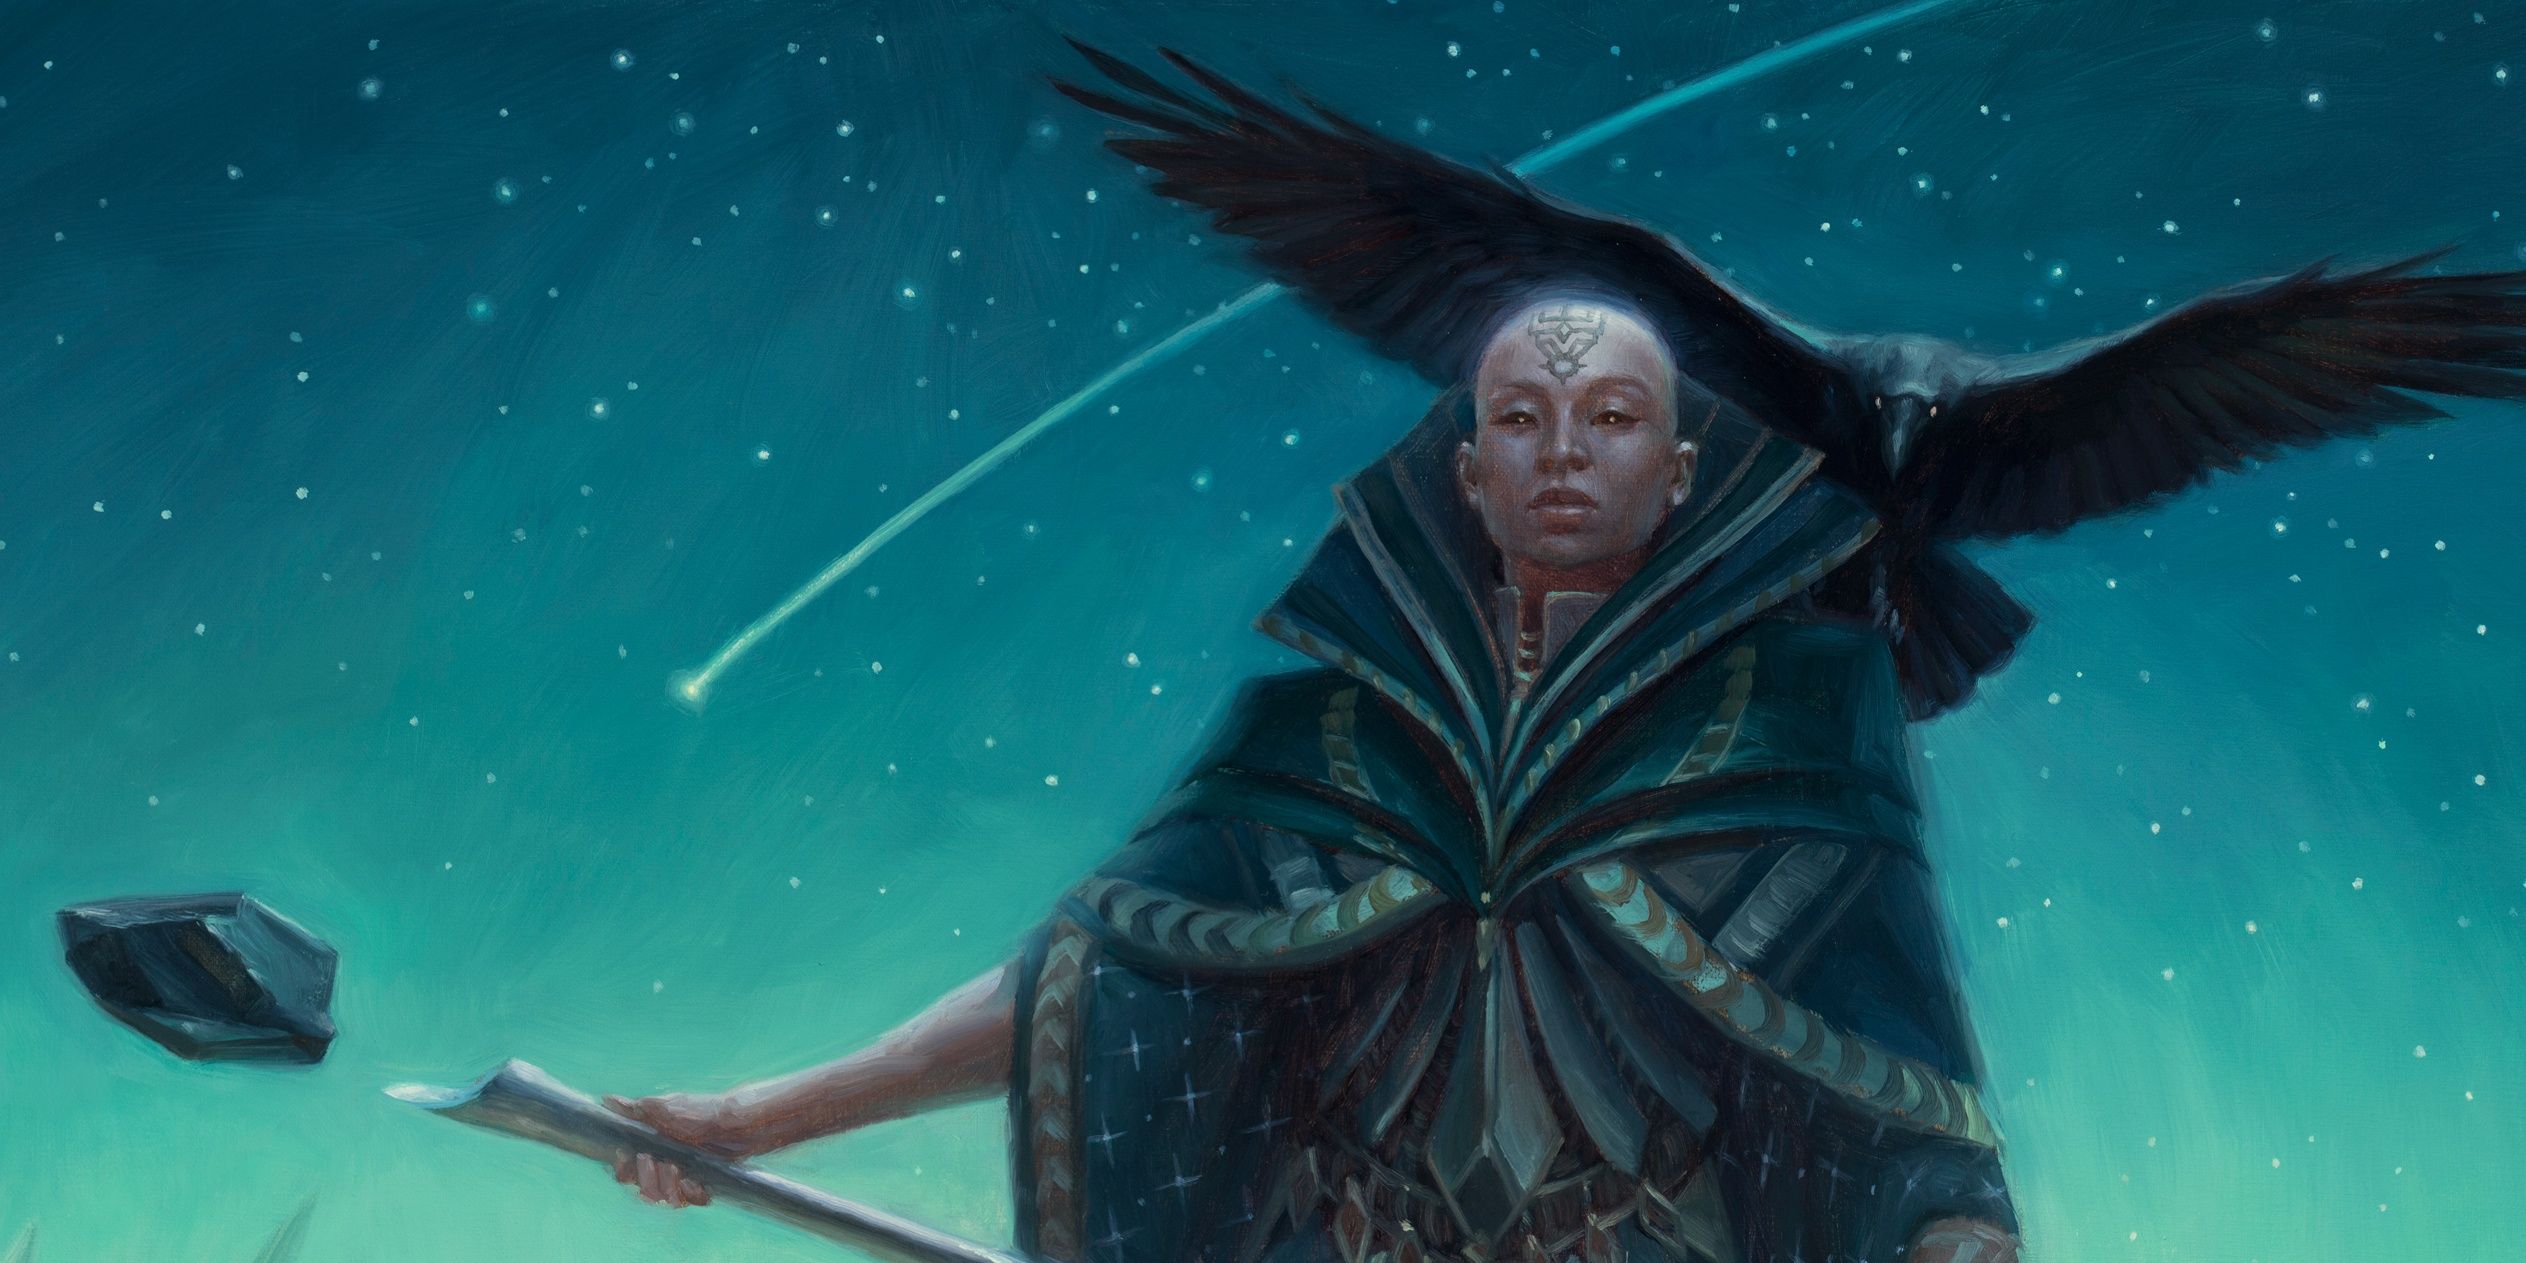 bald wizard with raven against shooting star night sky